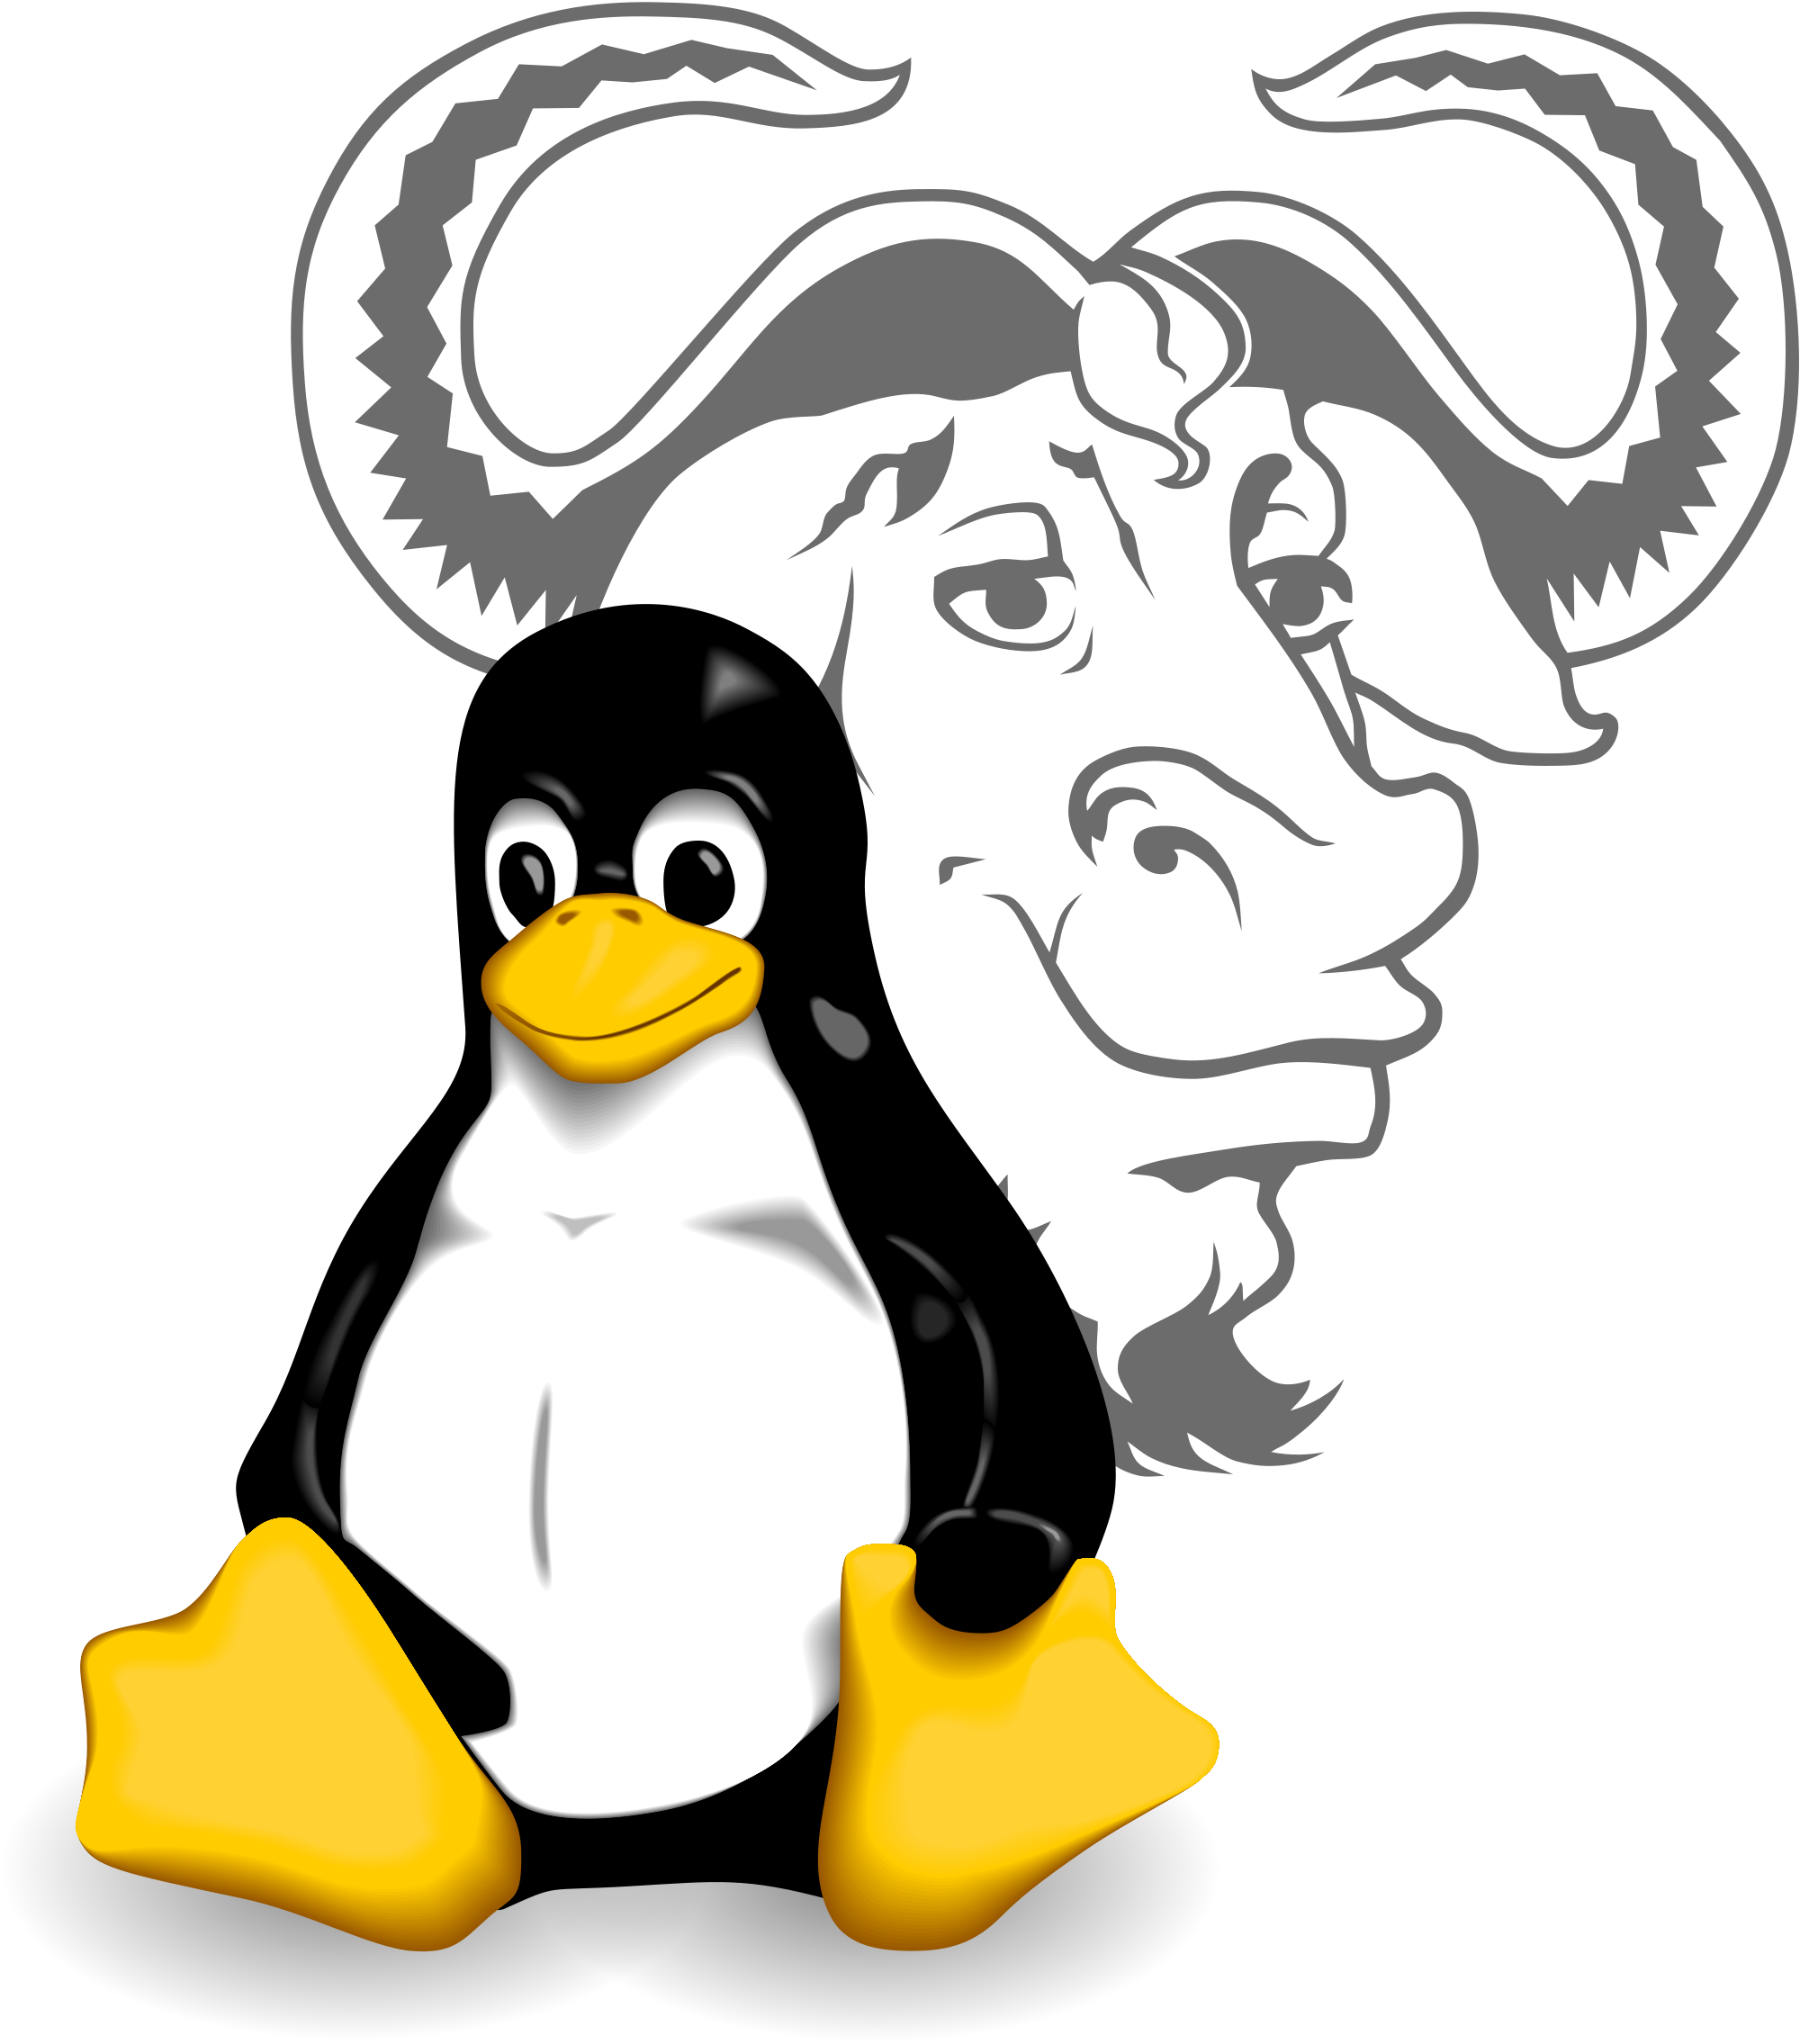 Linux Mascots Together